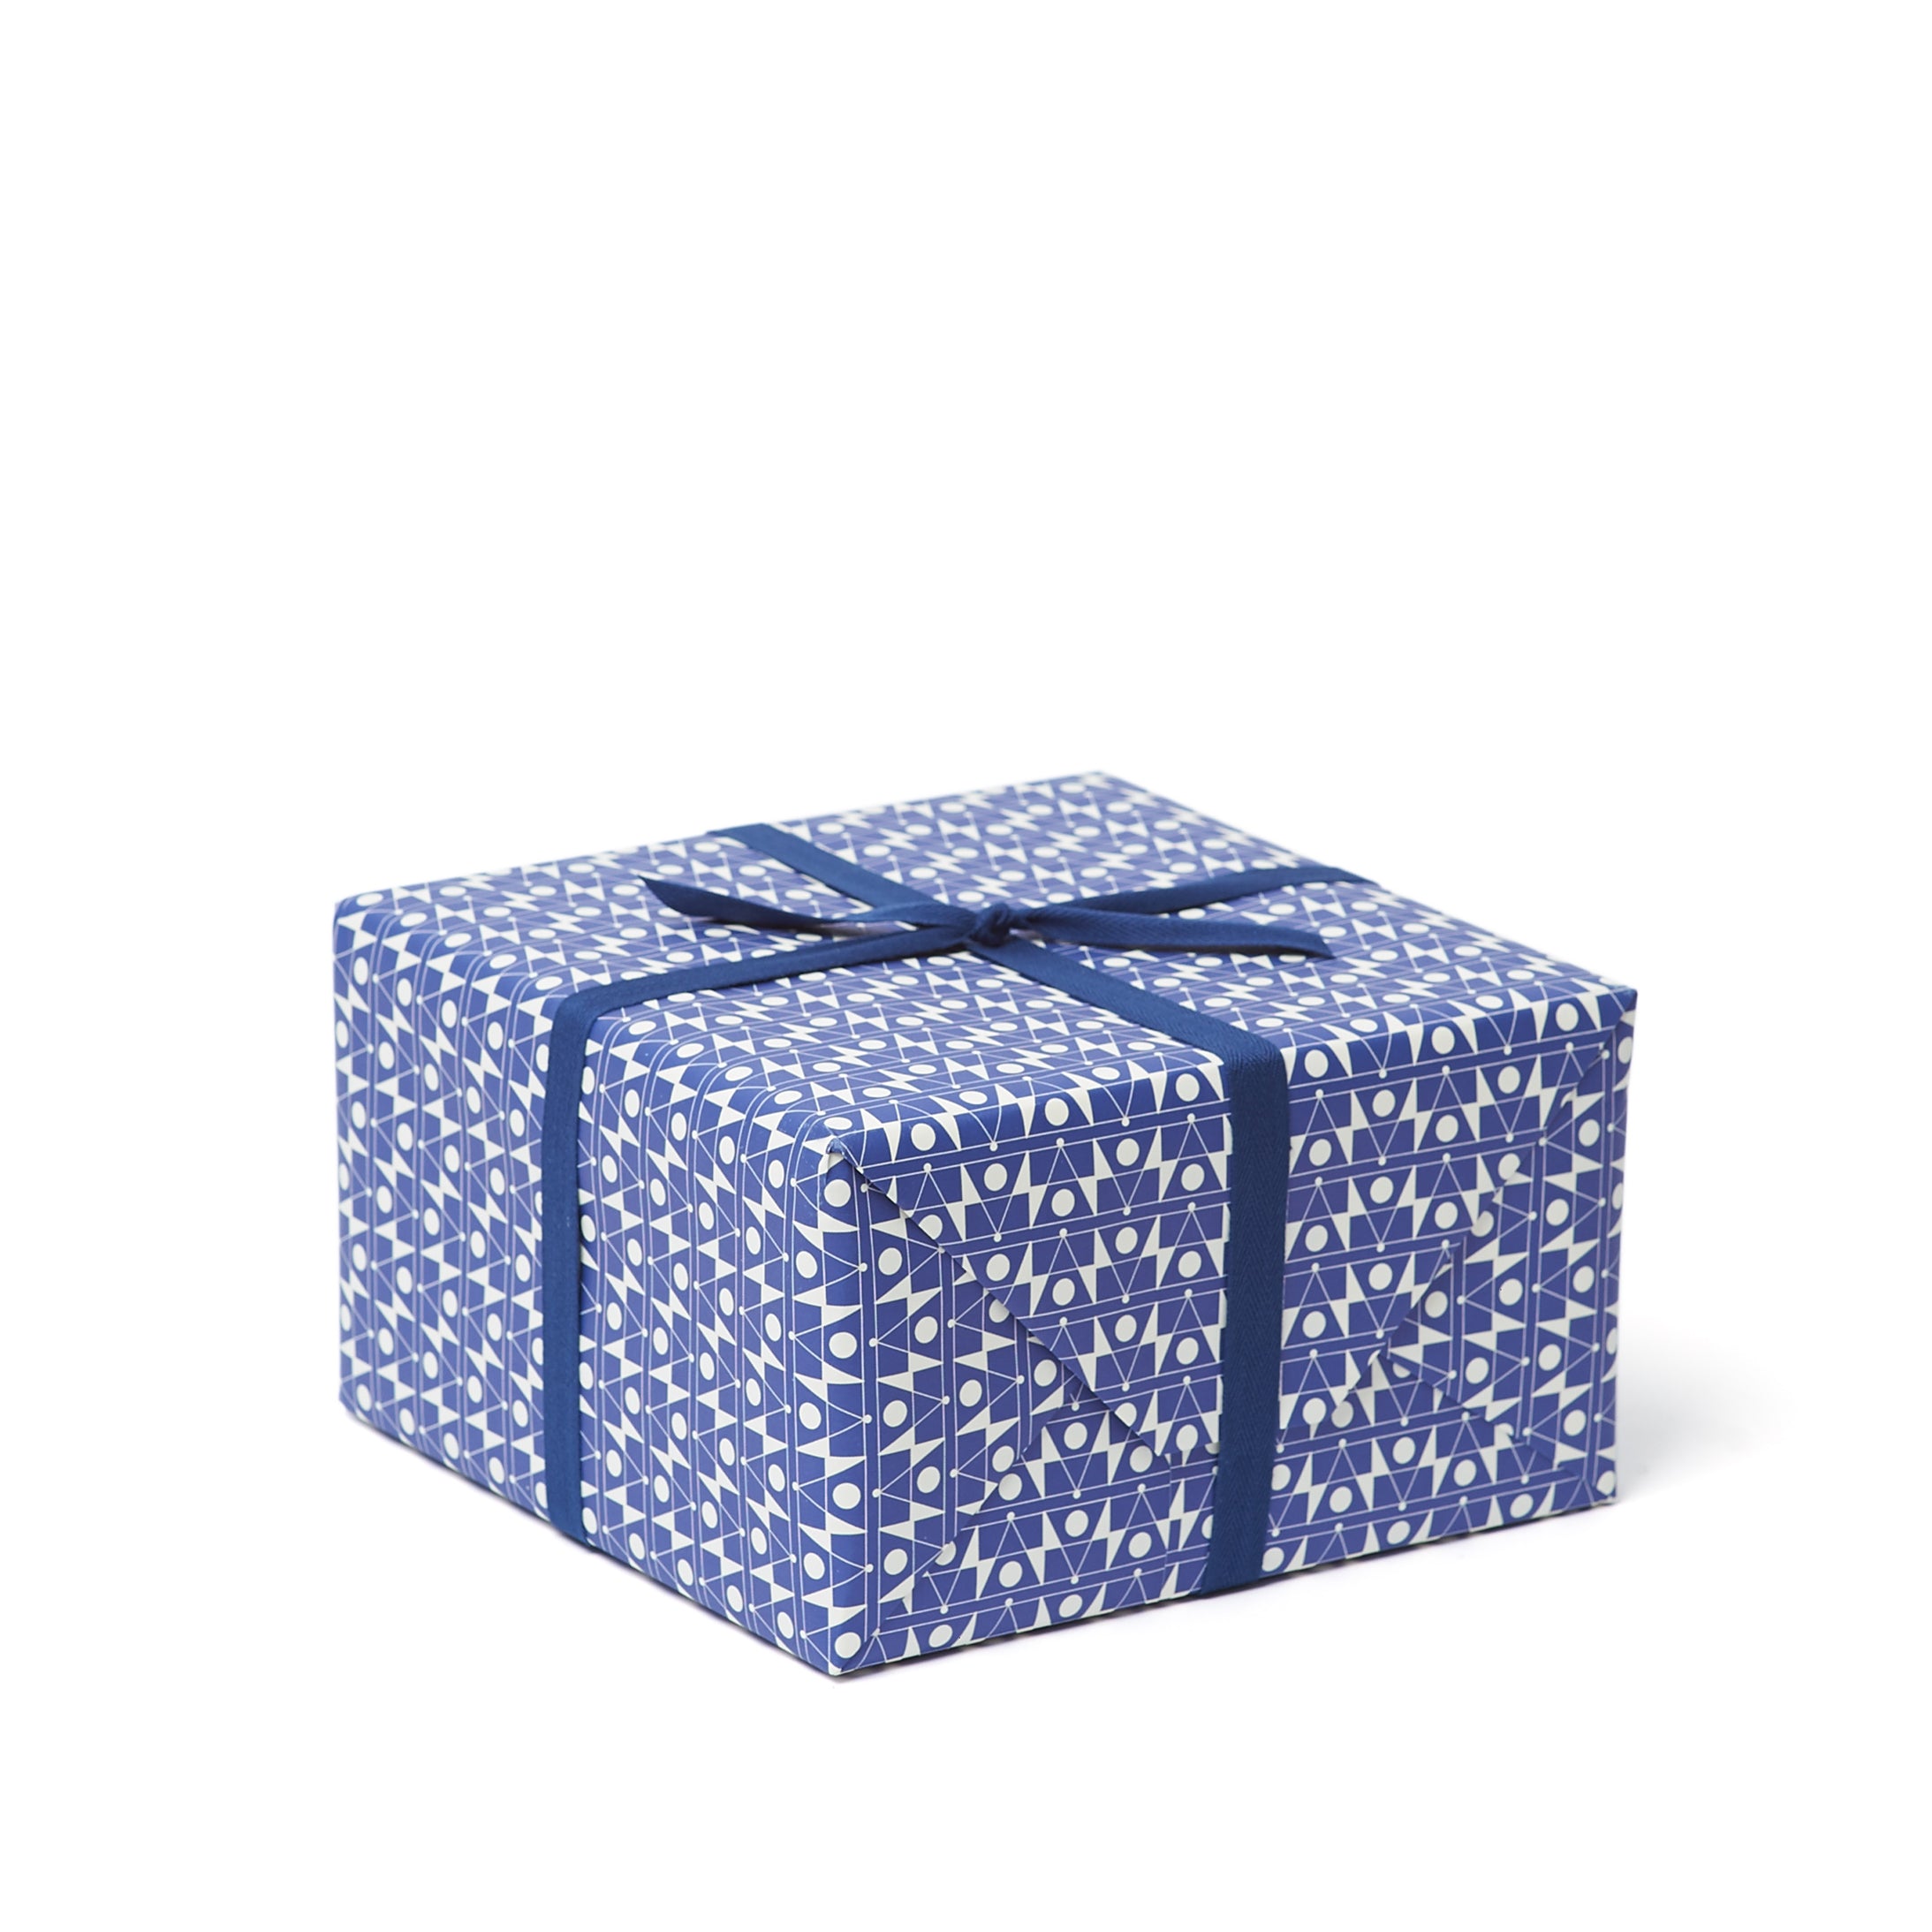 FREQUENCY Patterned Paper <br>Klein Blue - Esme Winter